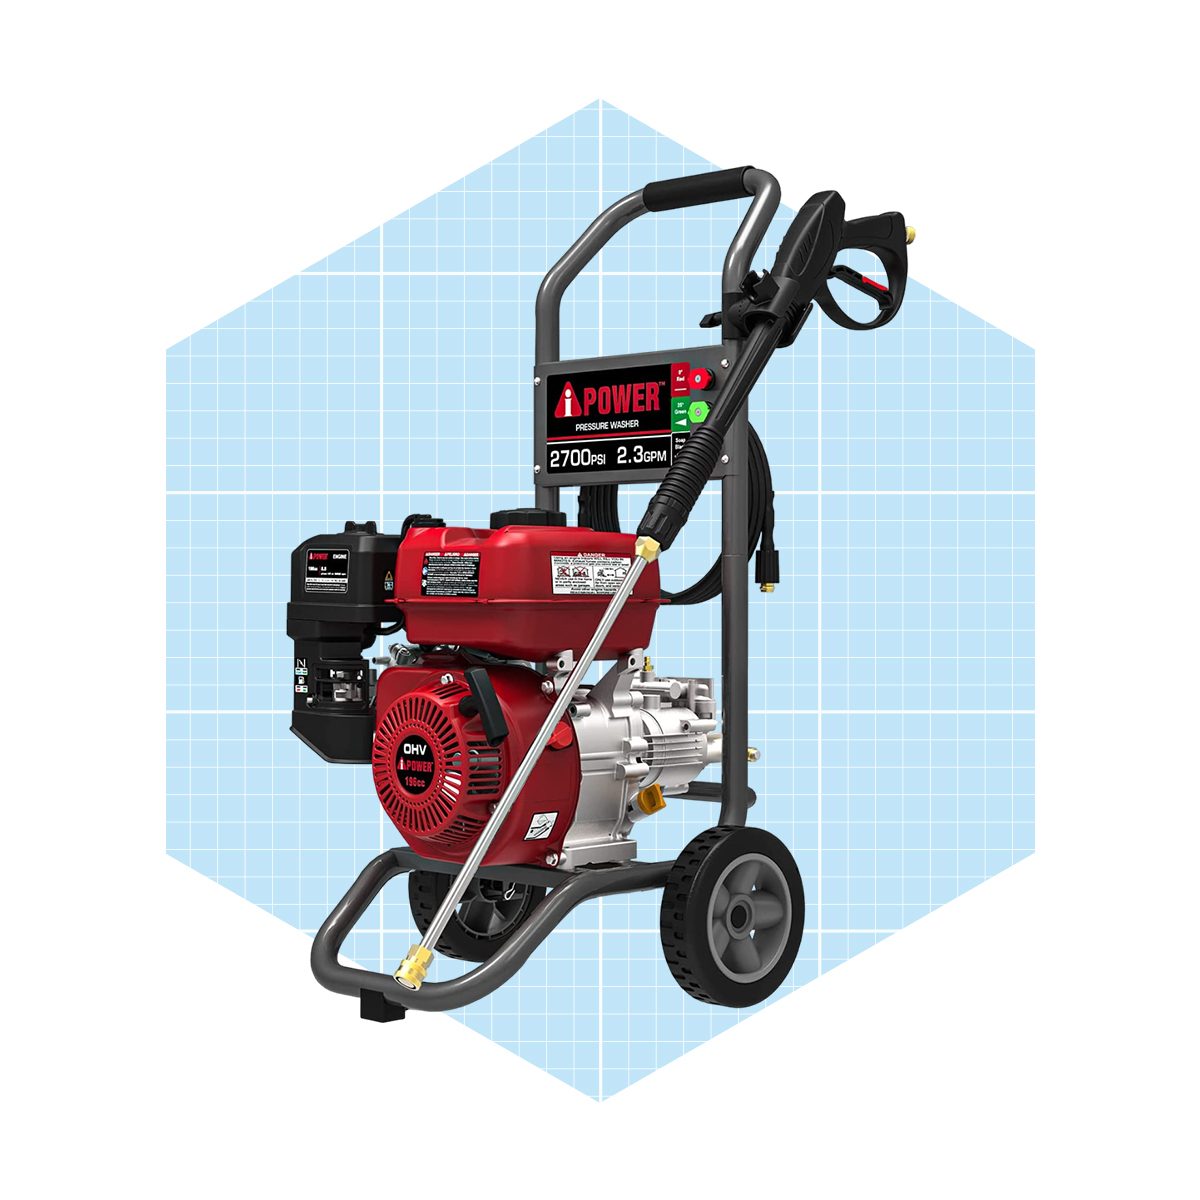 6 Best Gas Pressure Washers 2023 For Home, Car and More